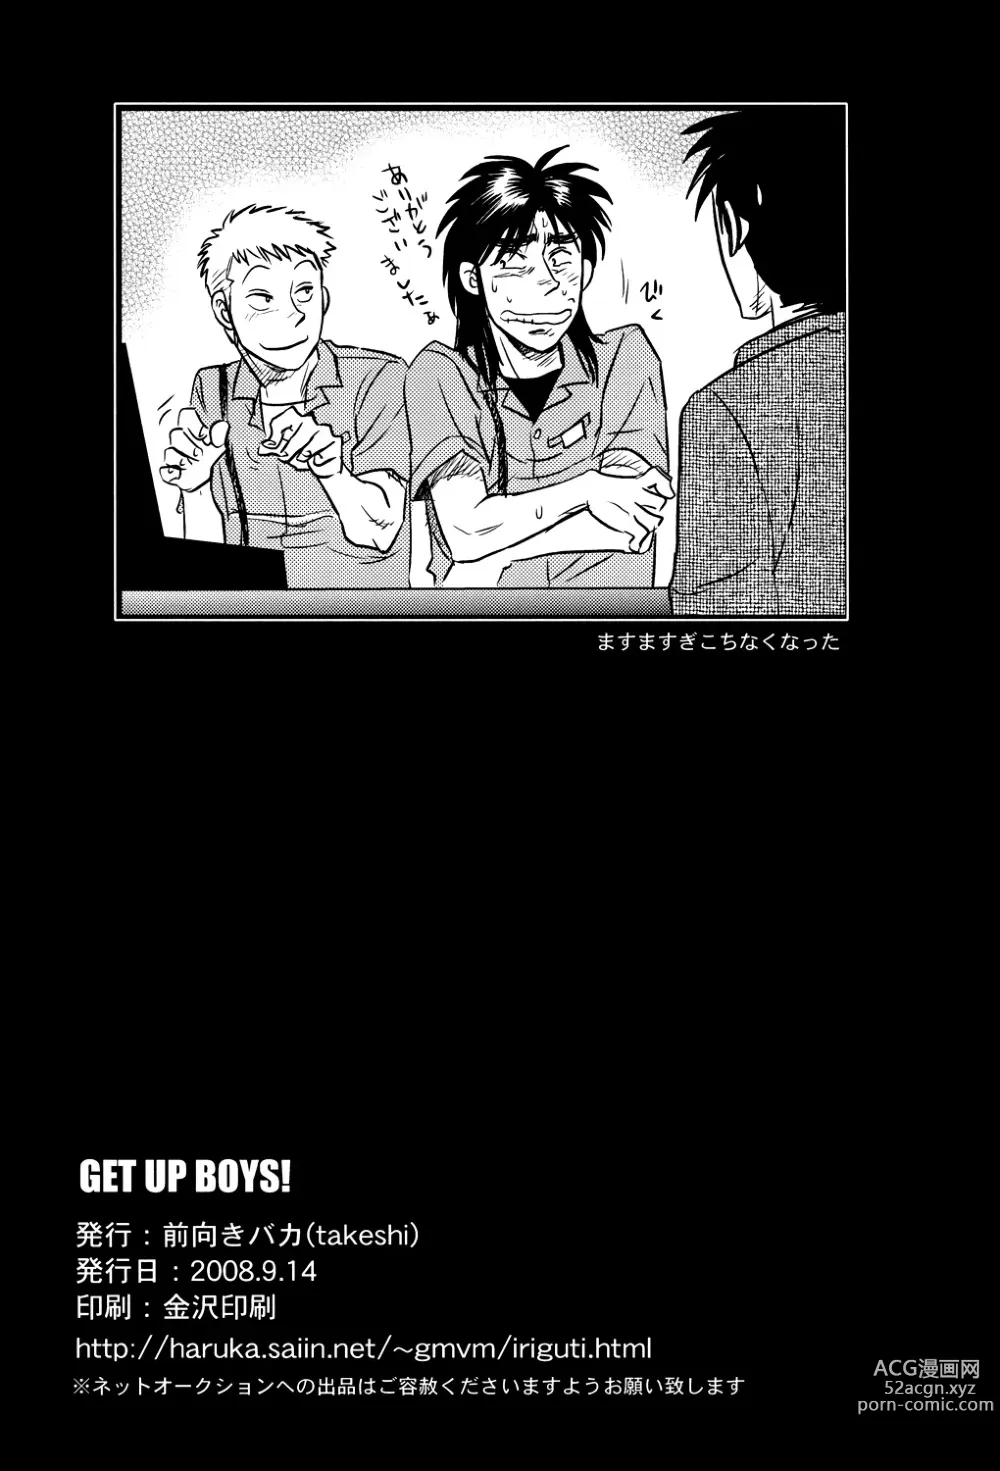 Page 29 of doujinshi Get Up Boys!